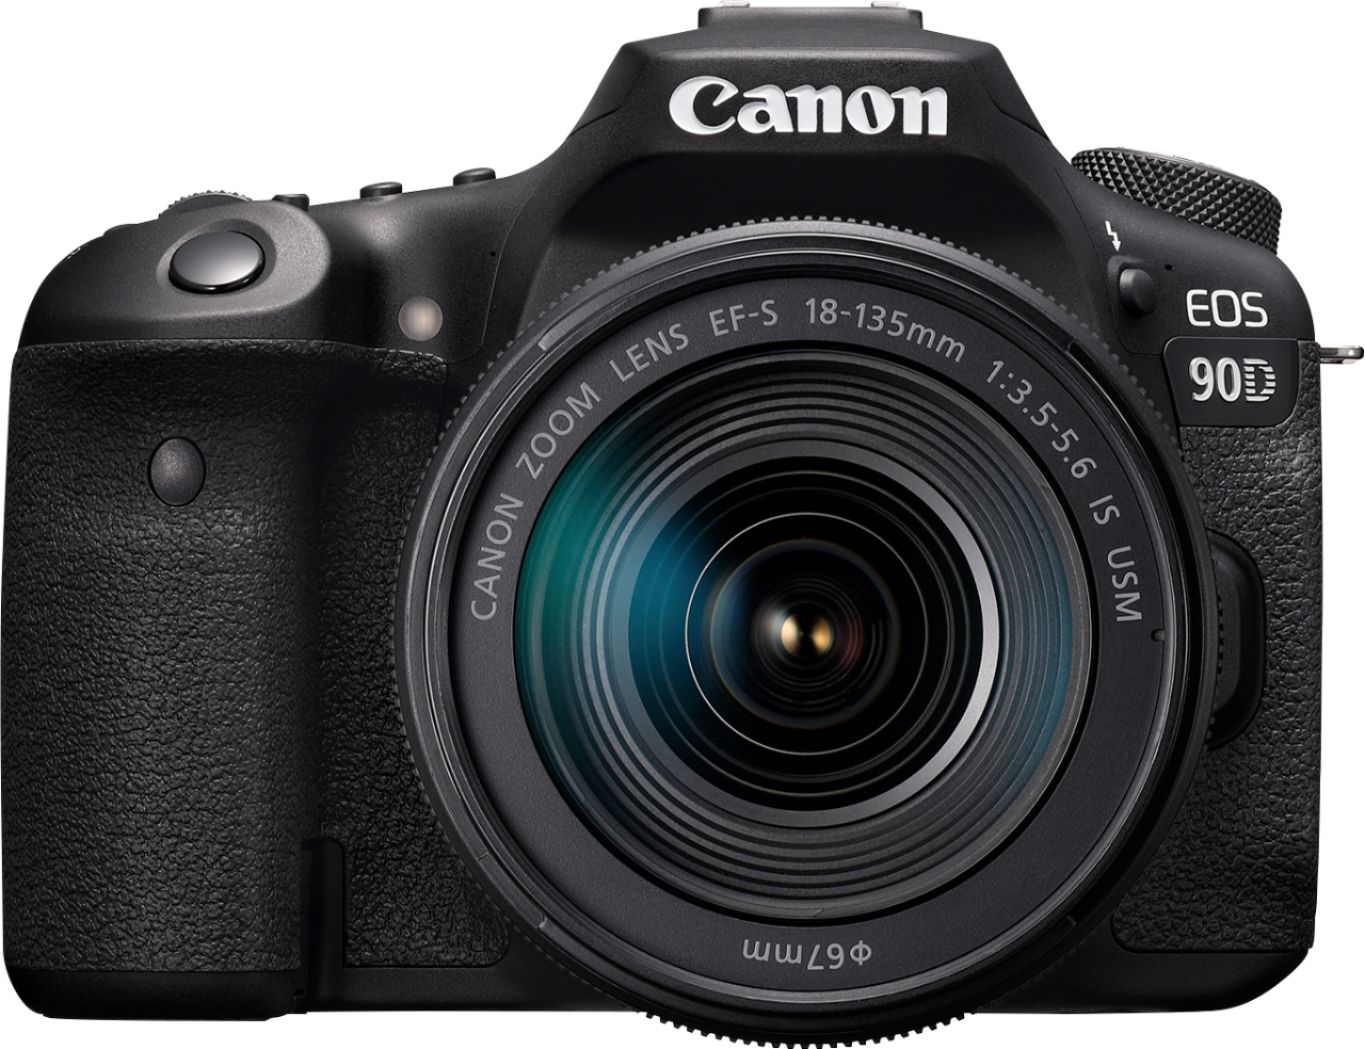 Canon EOS 90D DSLR Camera with EF-S 18-135mm Lens 3616C016 - Best Buy